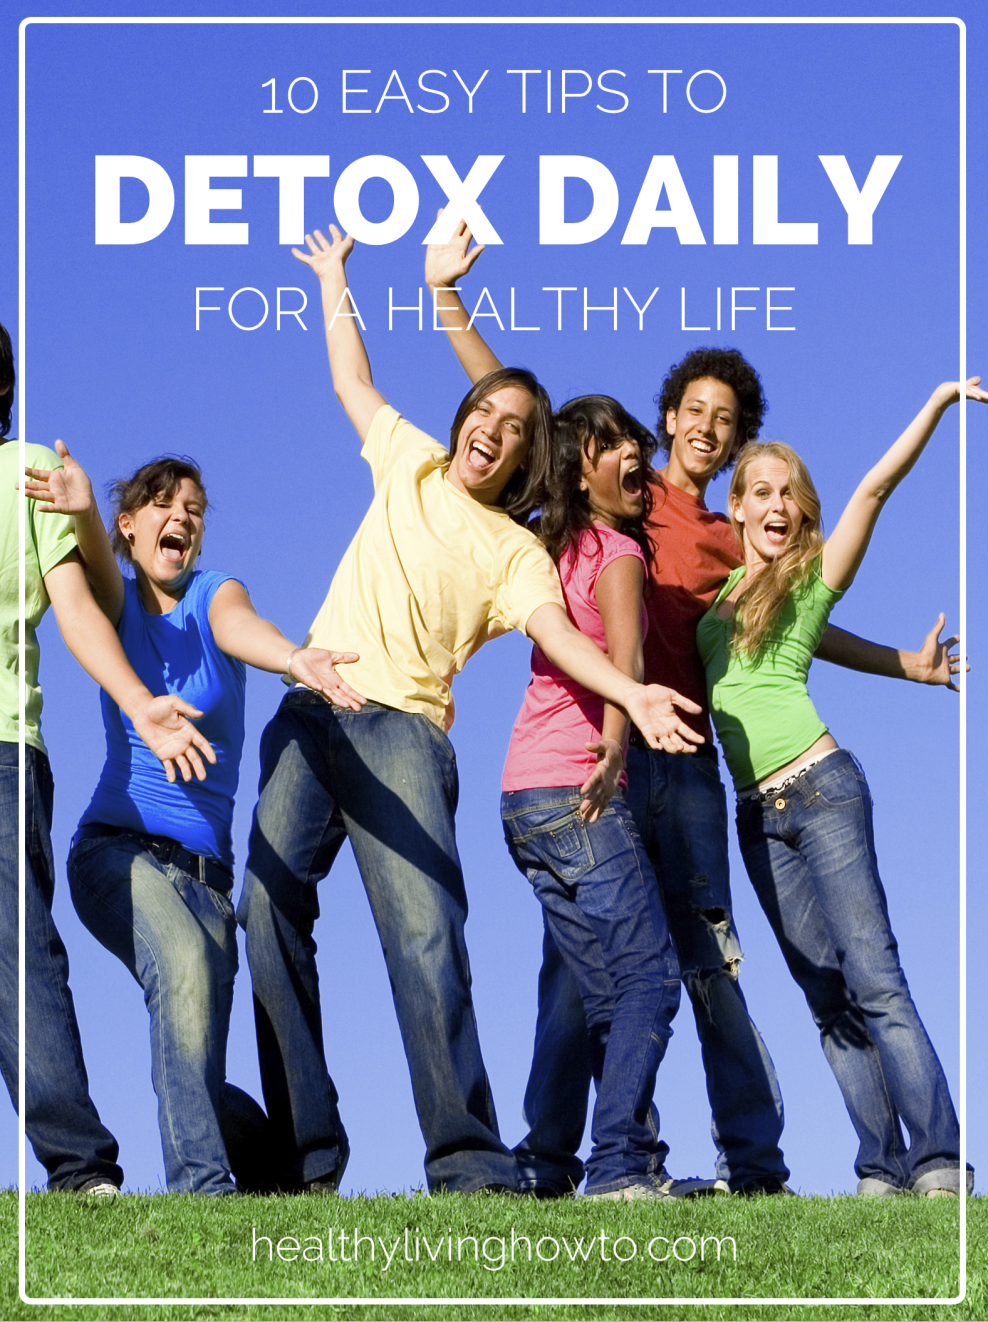 10 Tips to Detox Daily for a Healthy Life | healthylivinghowto.com